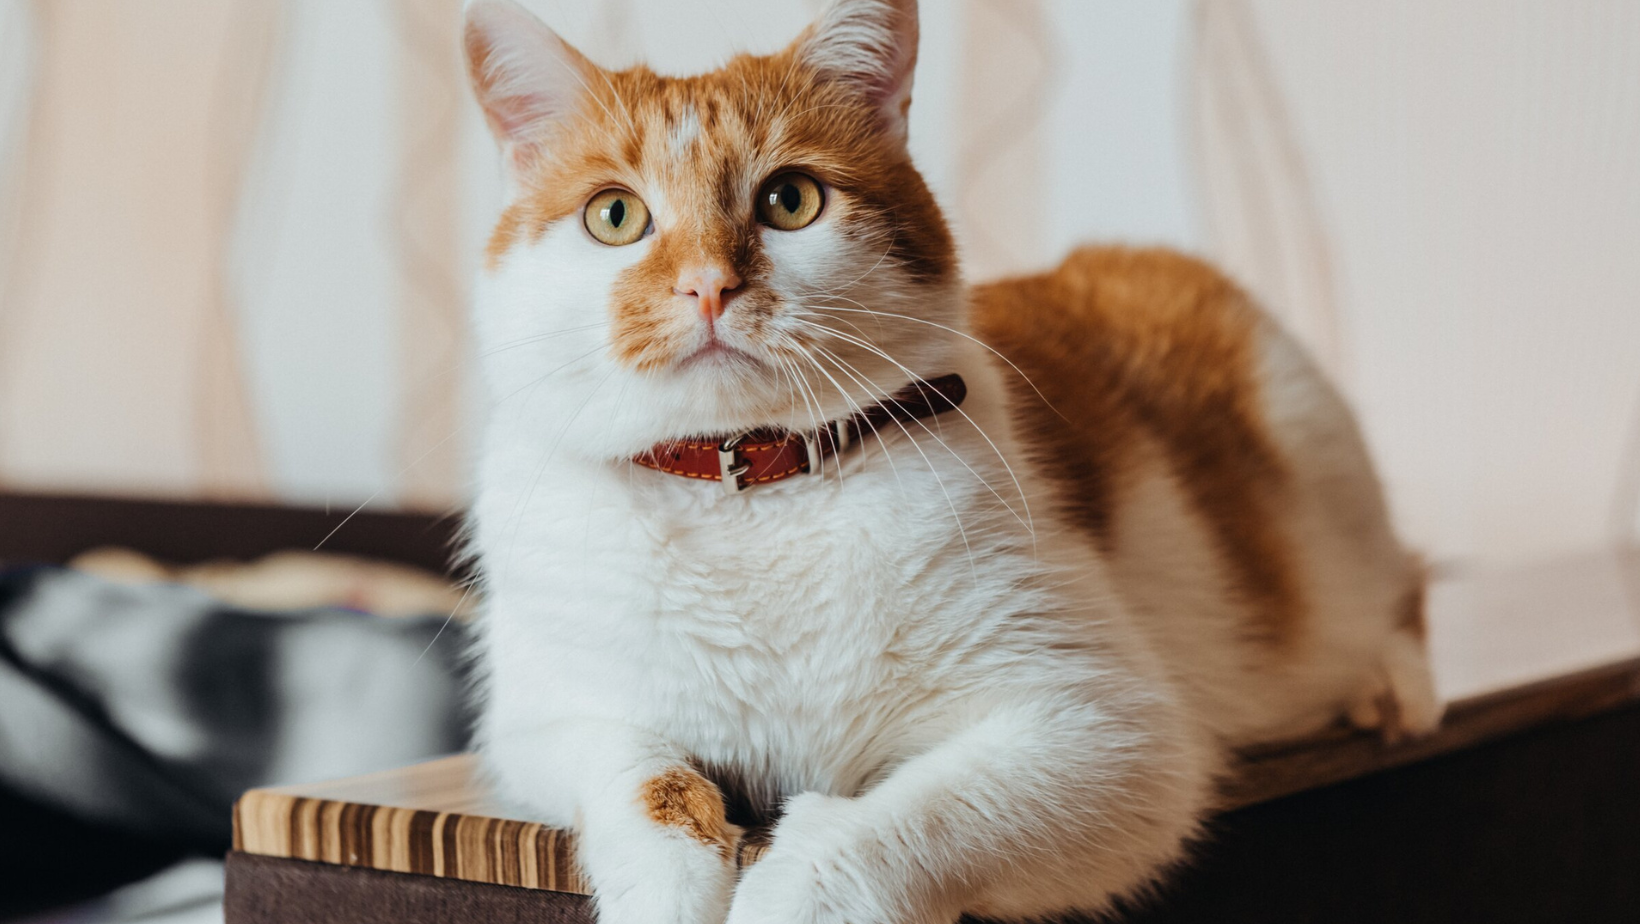 Cat Skin Health 101: Causes, Prevention, and Gentle Care Tips